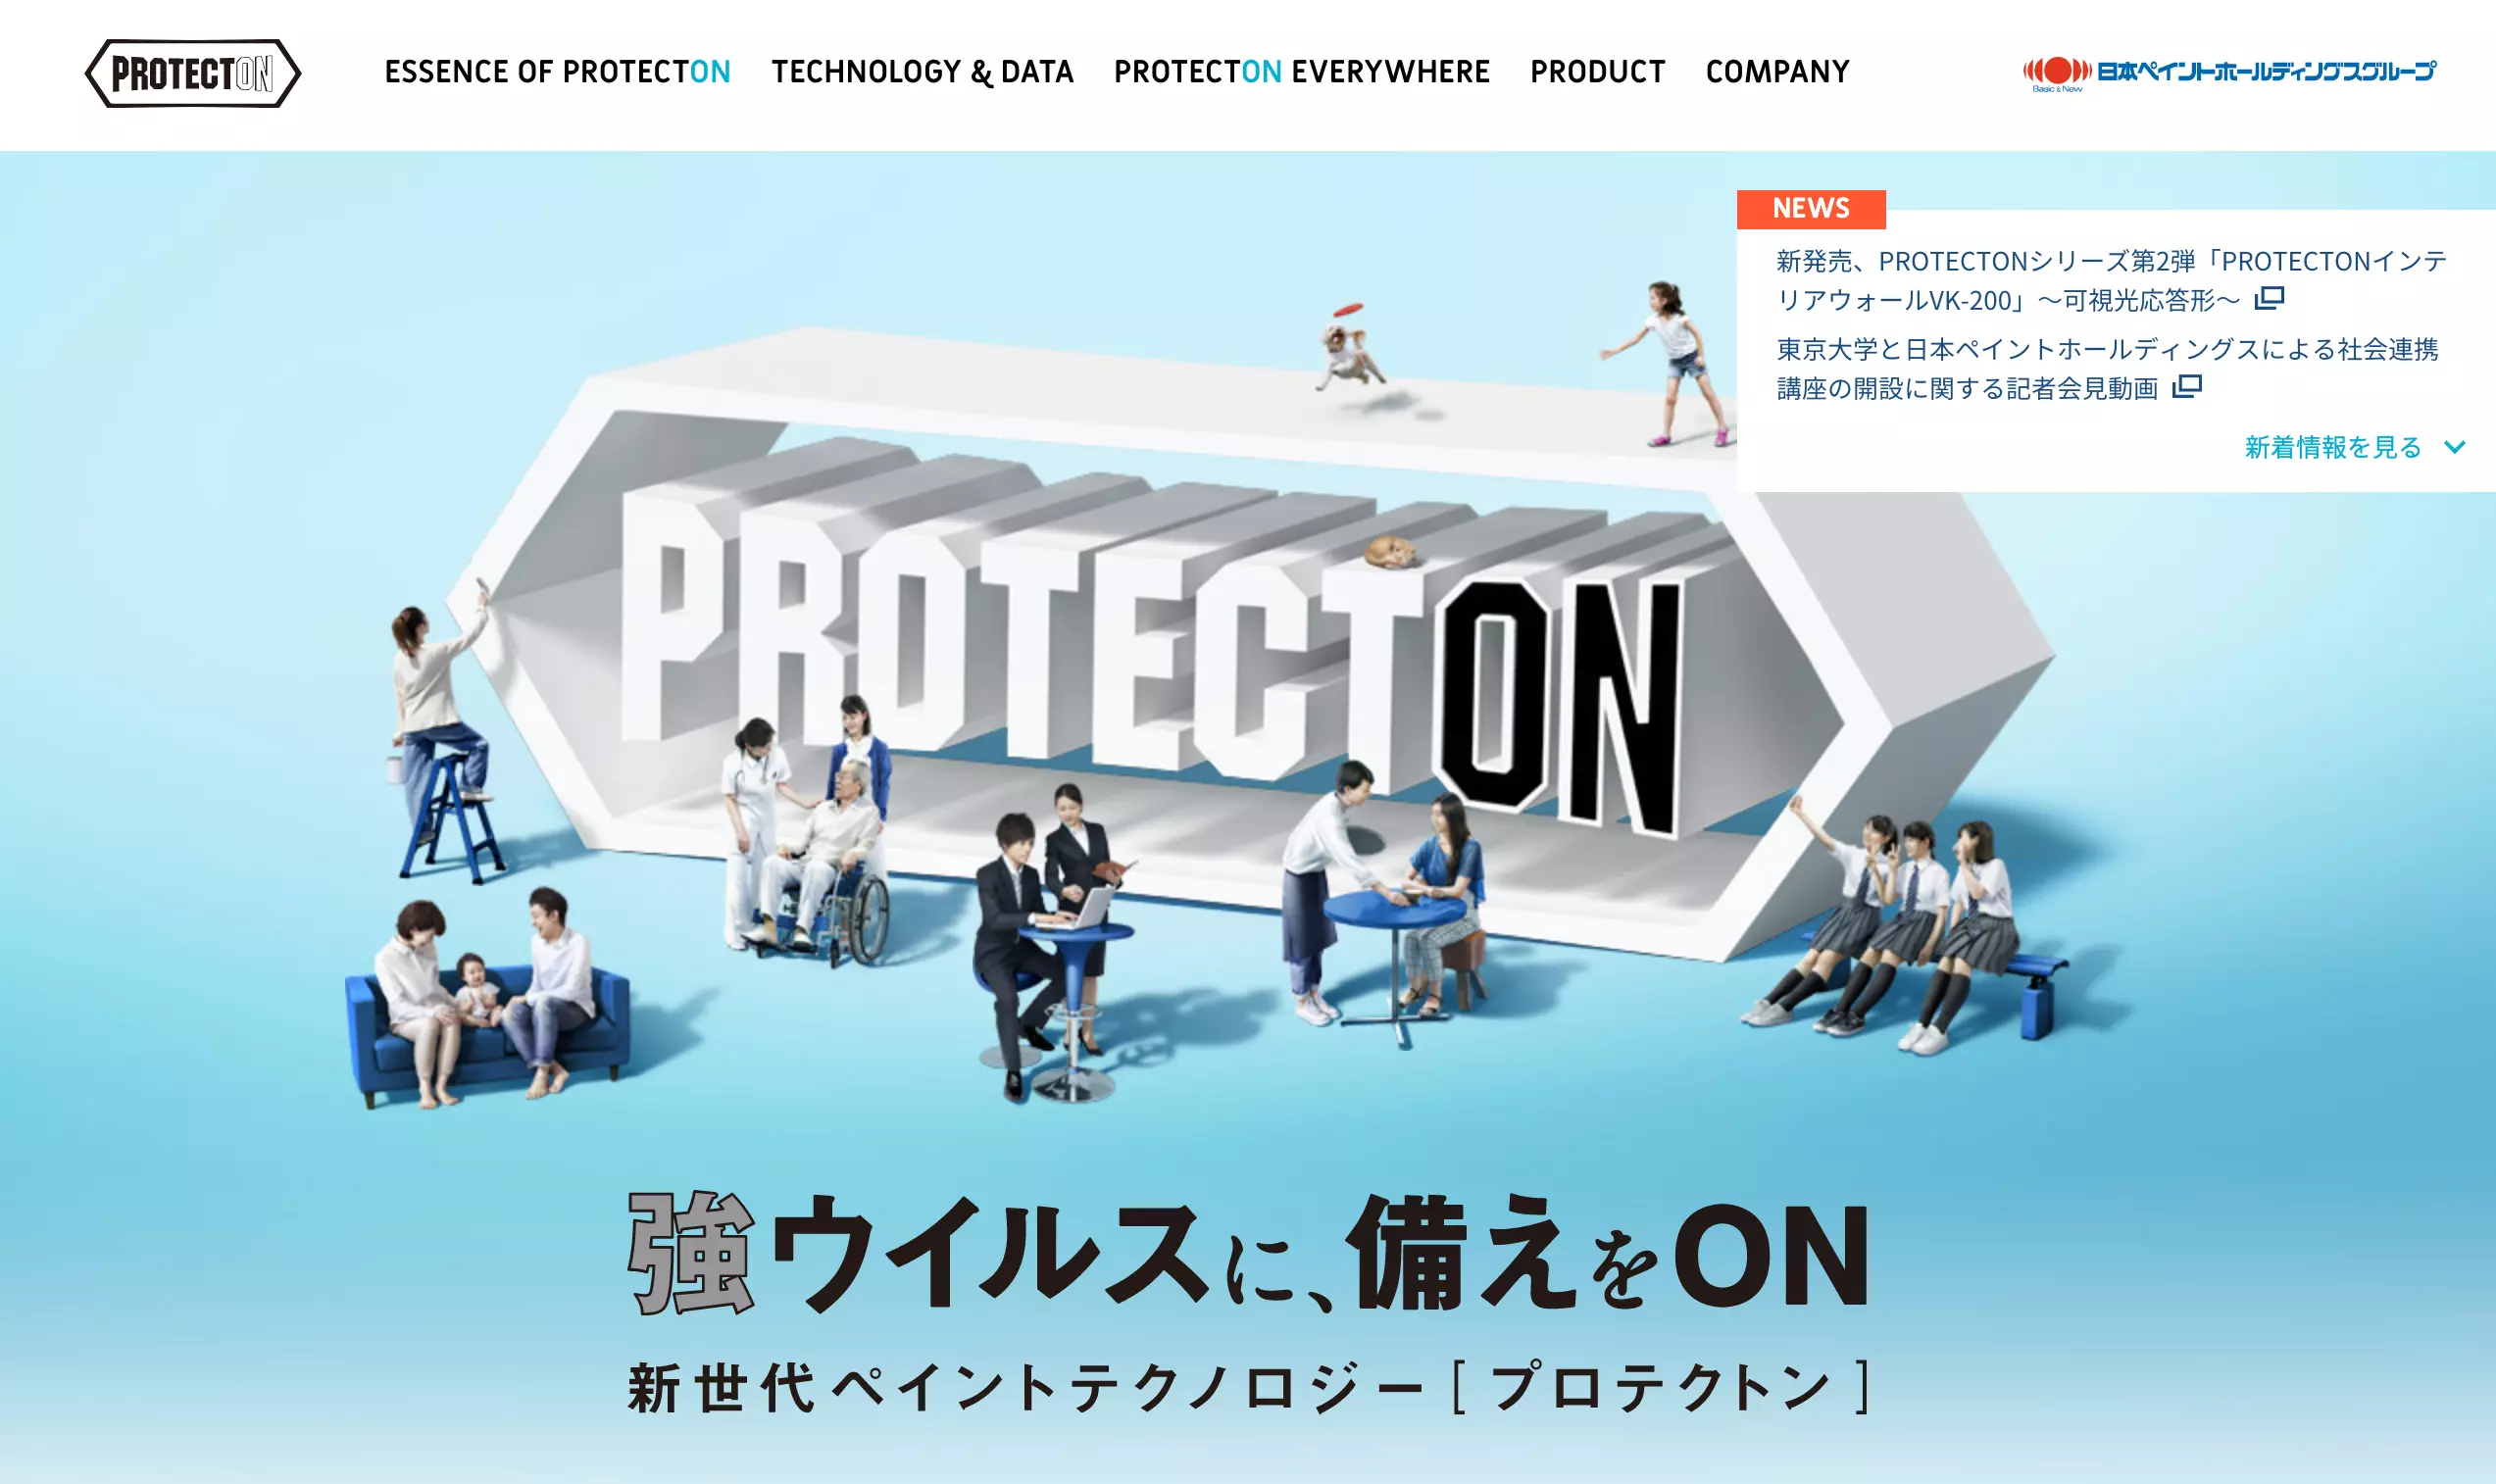 Paint Technology Brand with Antivirus and Antibacterial Functionality “PROTECTON”